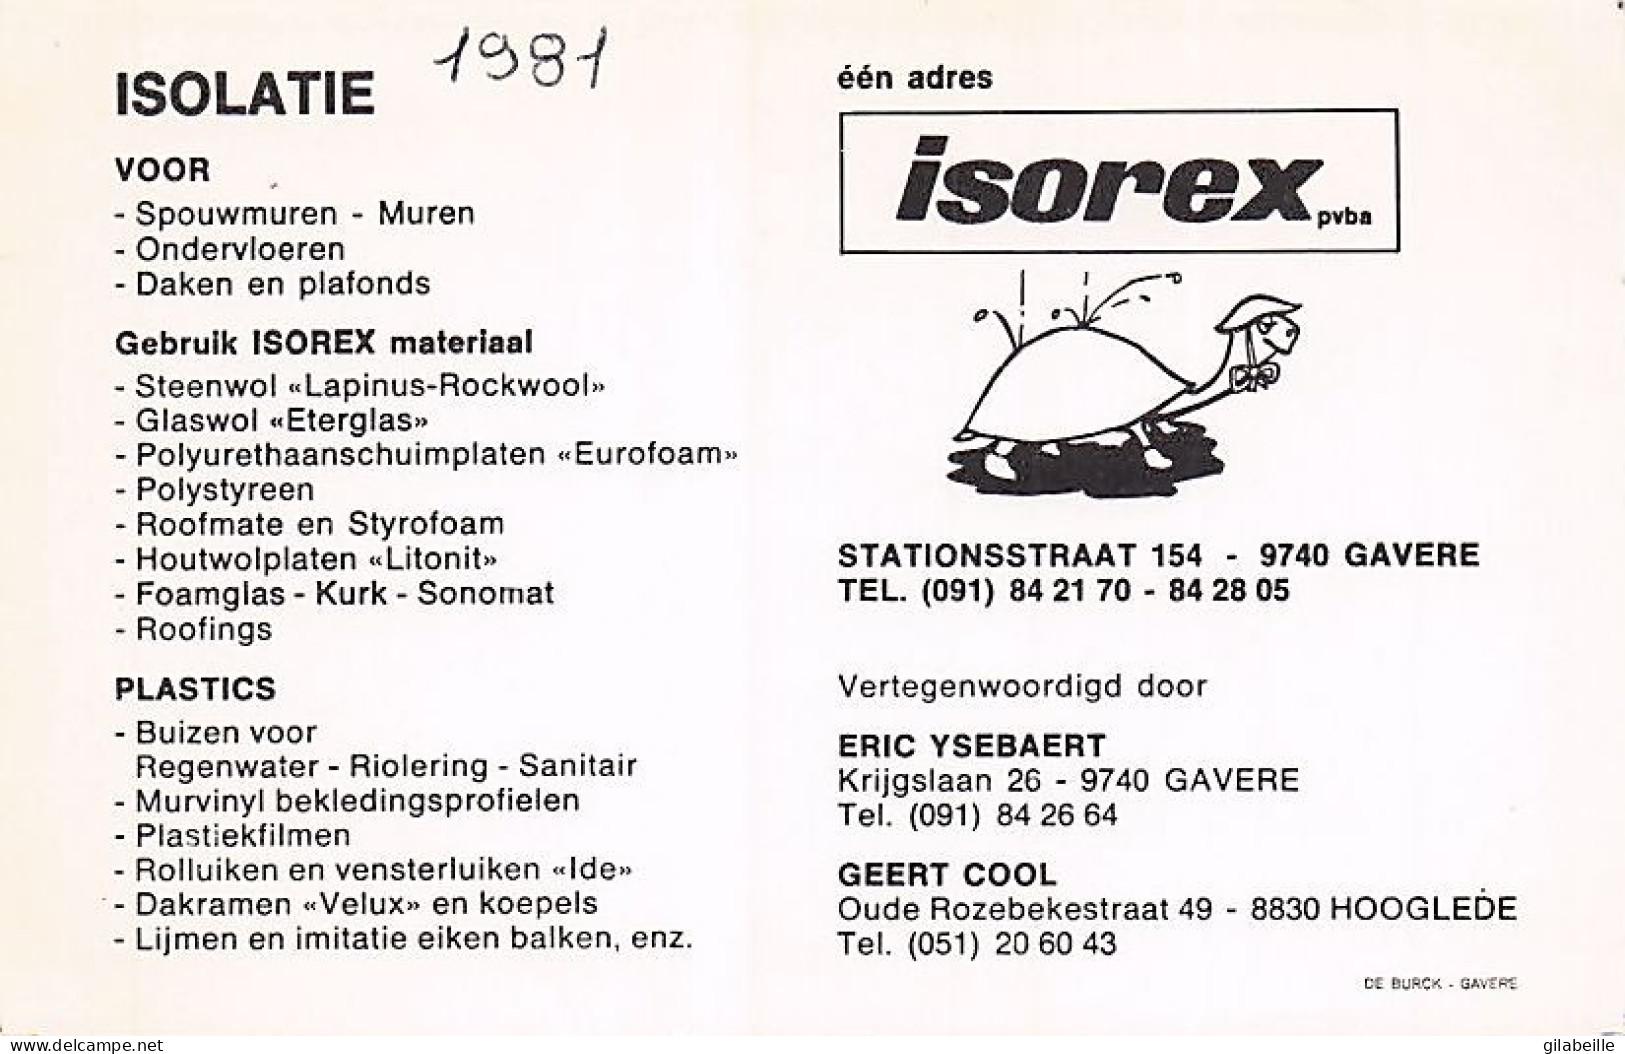 Velo - Cyclisme - Coureur Cycliste Belge Rudy Steyvers - Team Isorex - 1981  - Unclassified